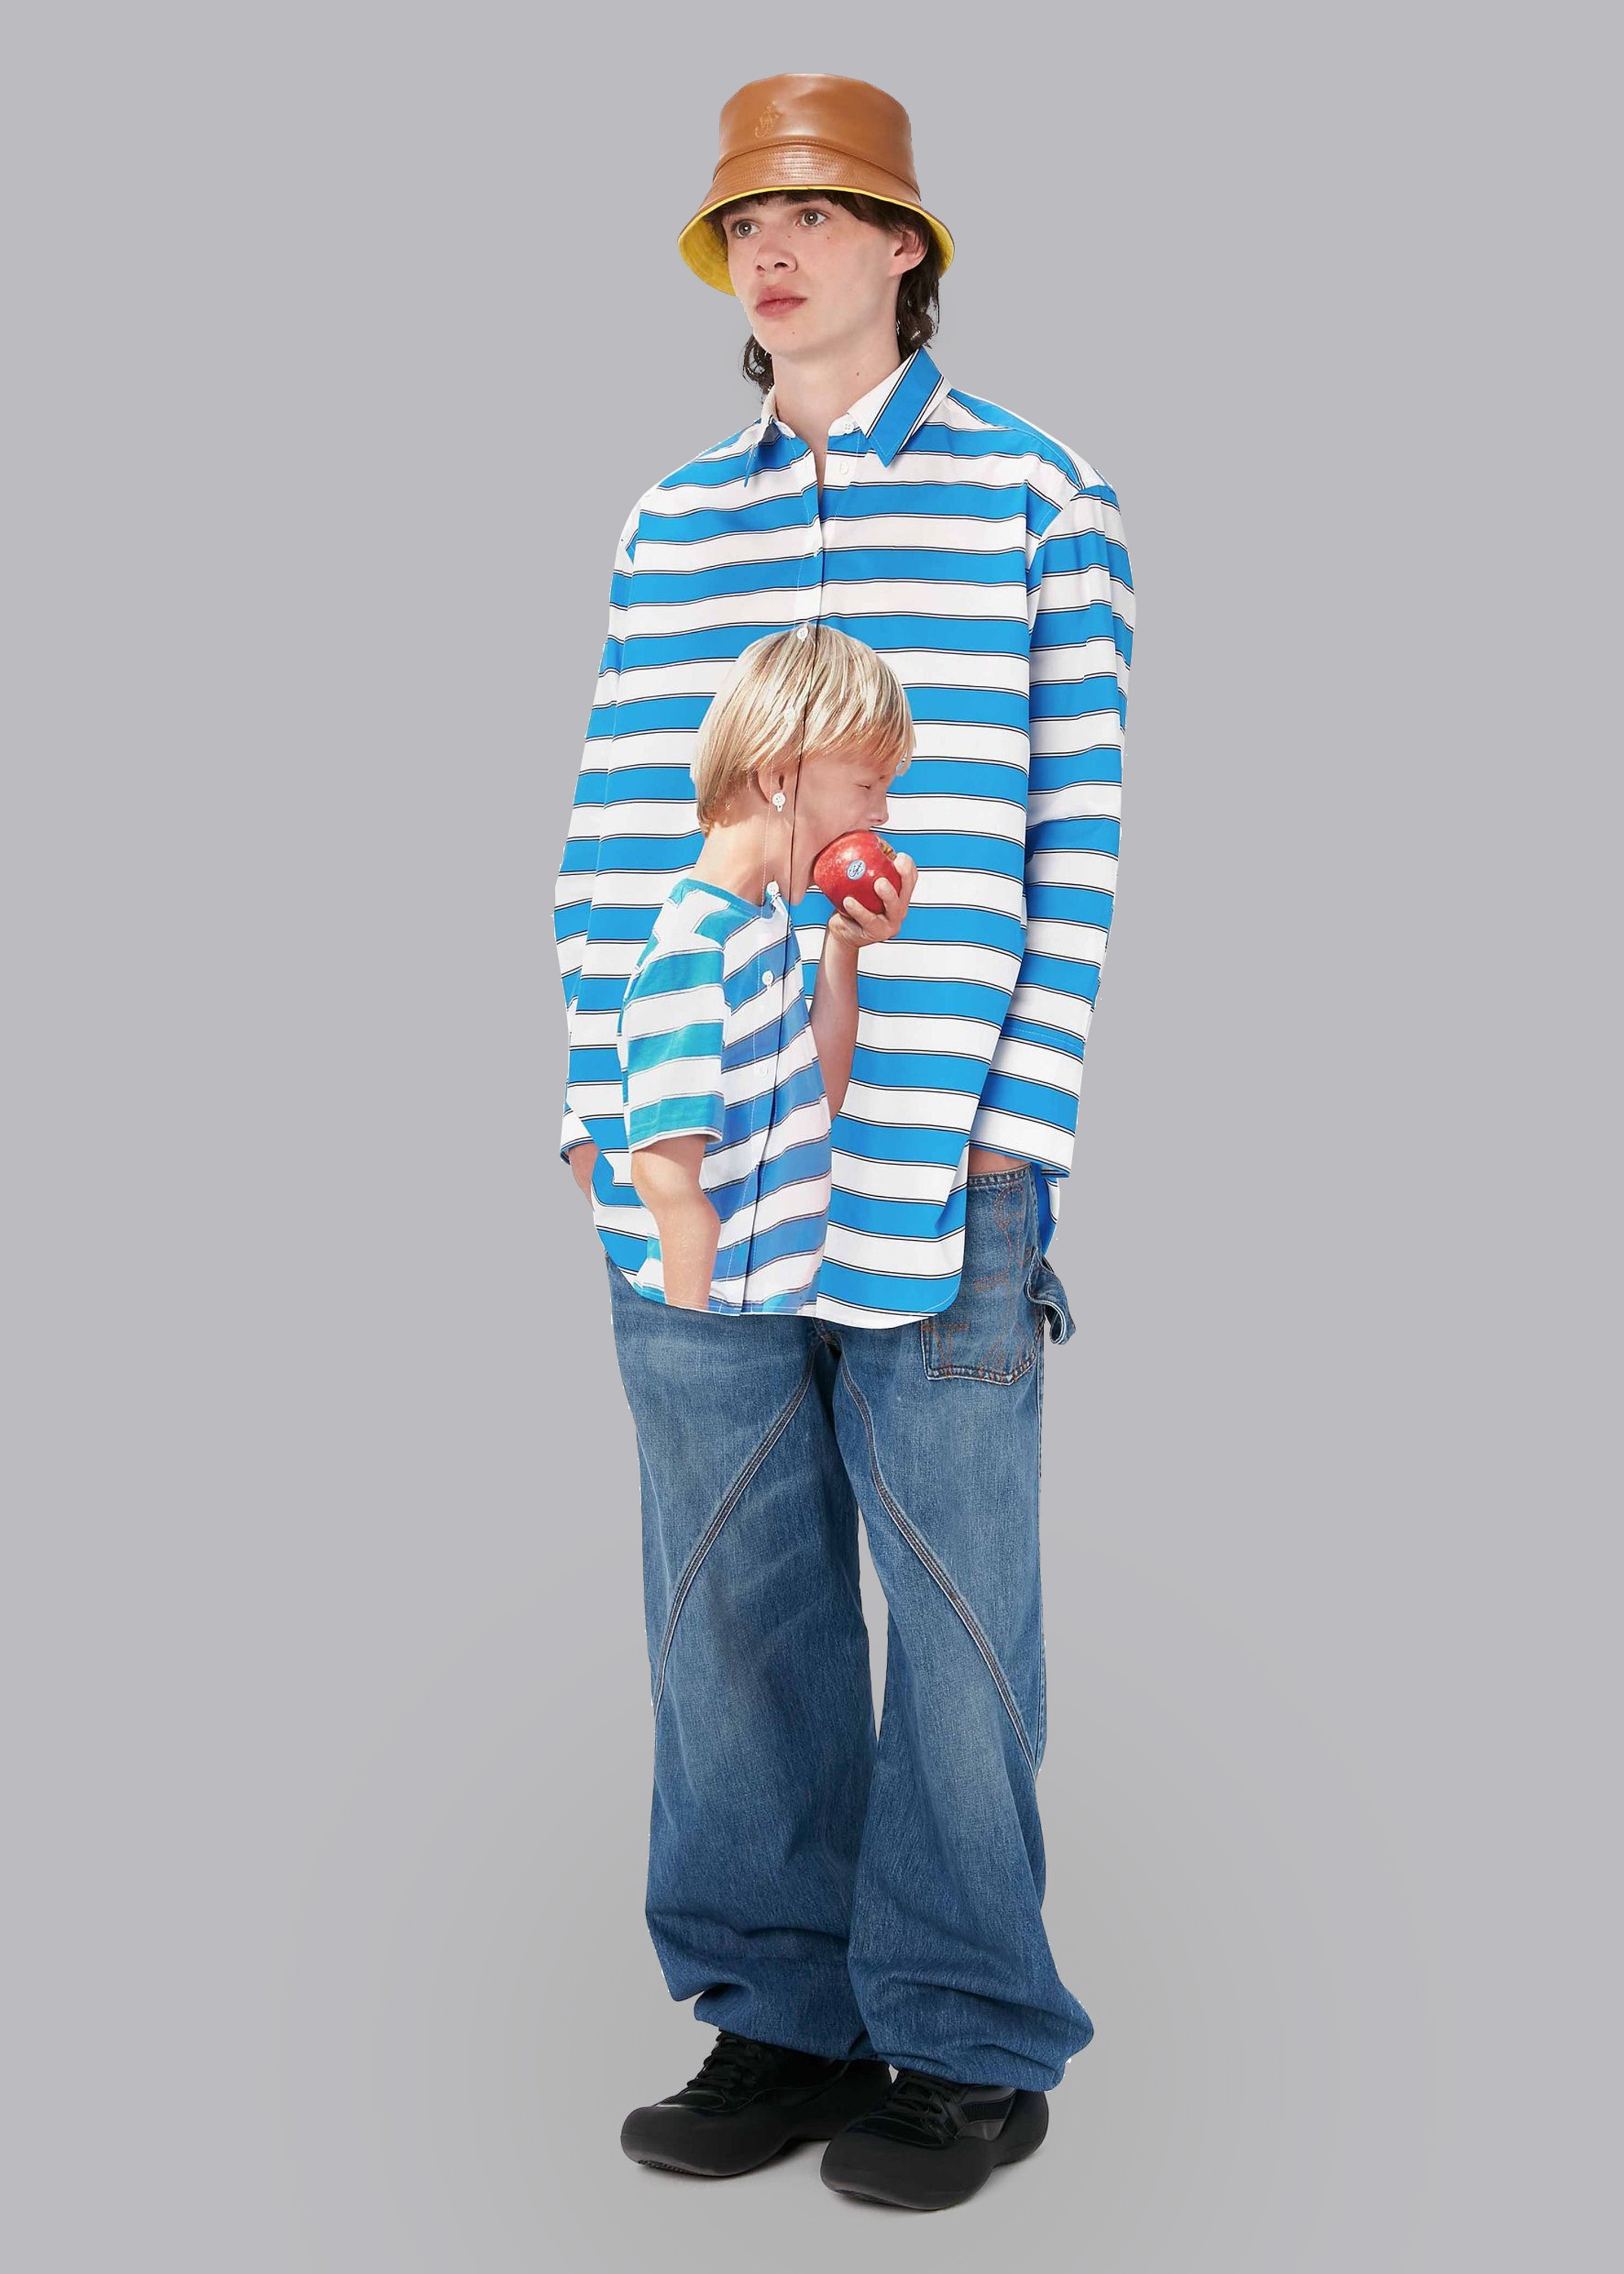 JW Anderson Boy with Apple Oversized Shirt - Blue/White - 2